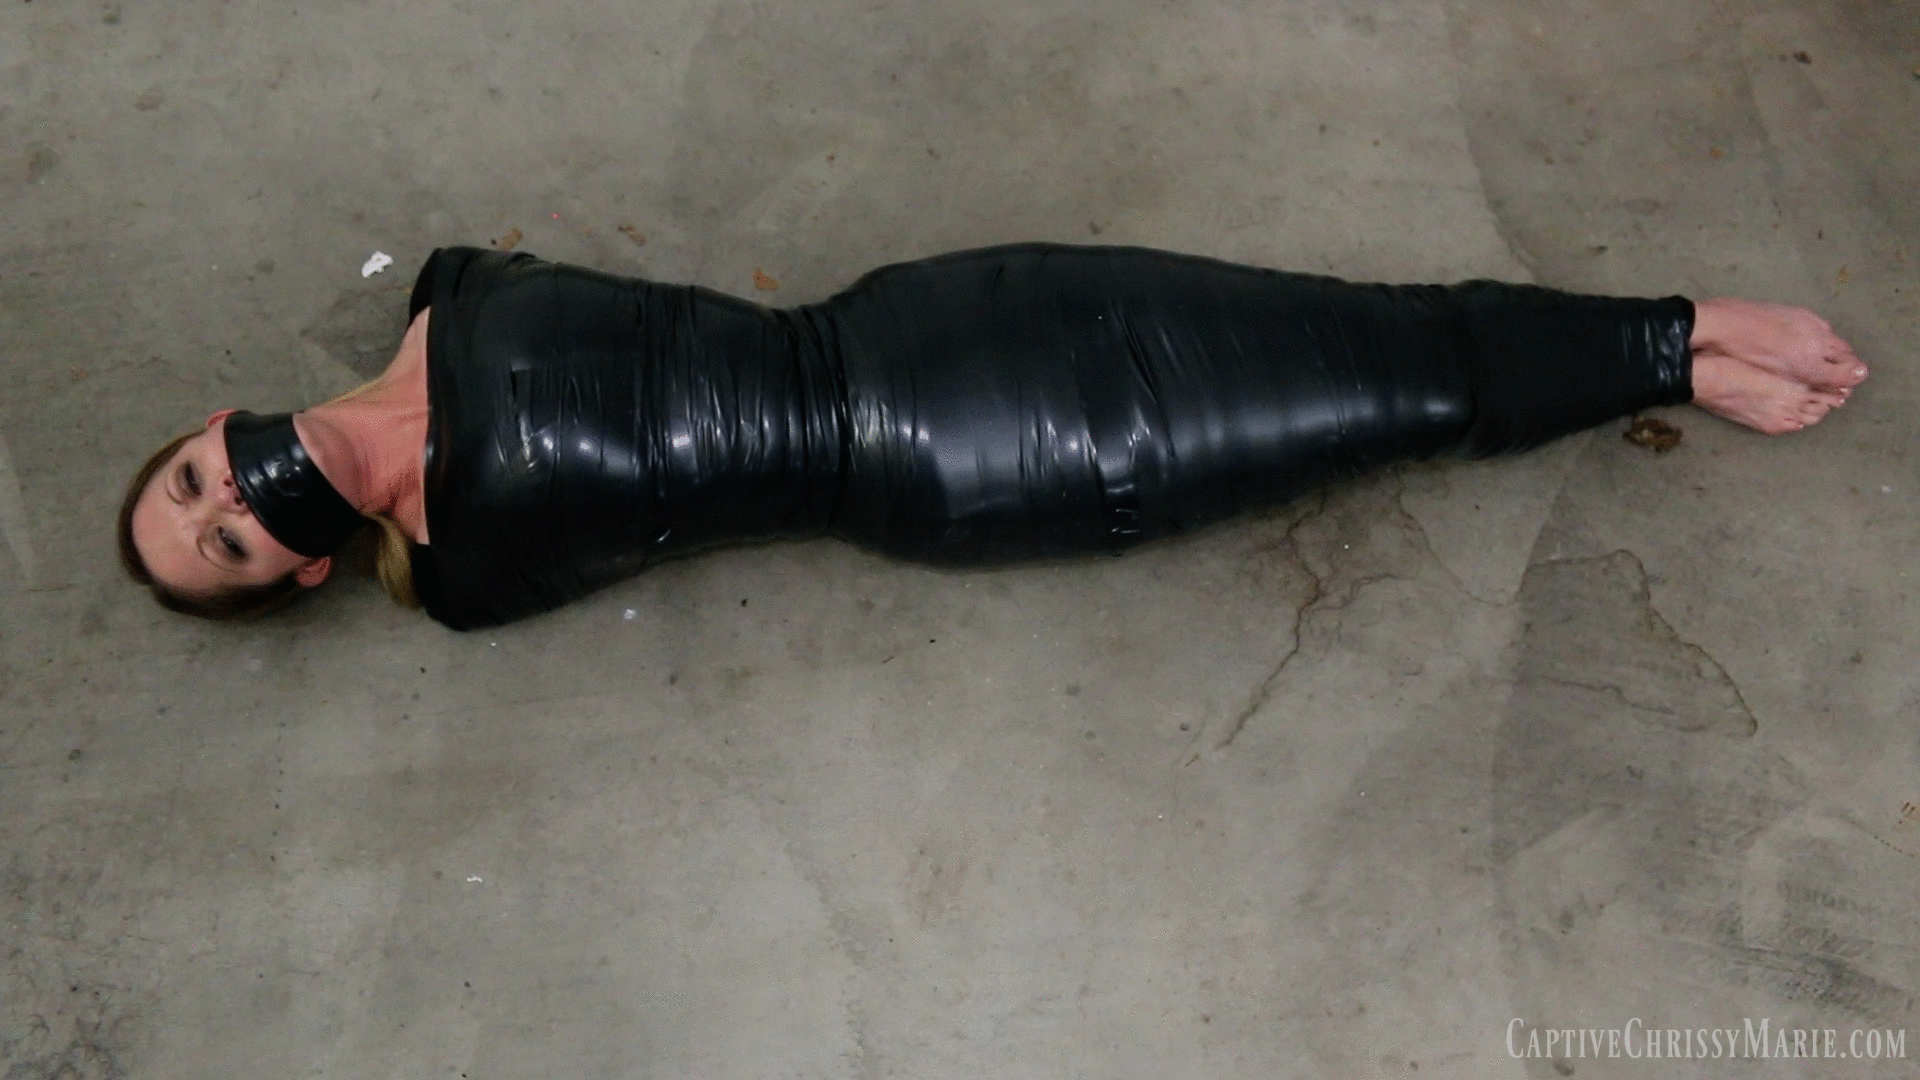 The E. recommend best of dildo live stream duct tape mummification